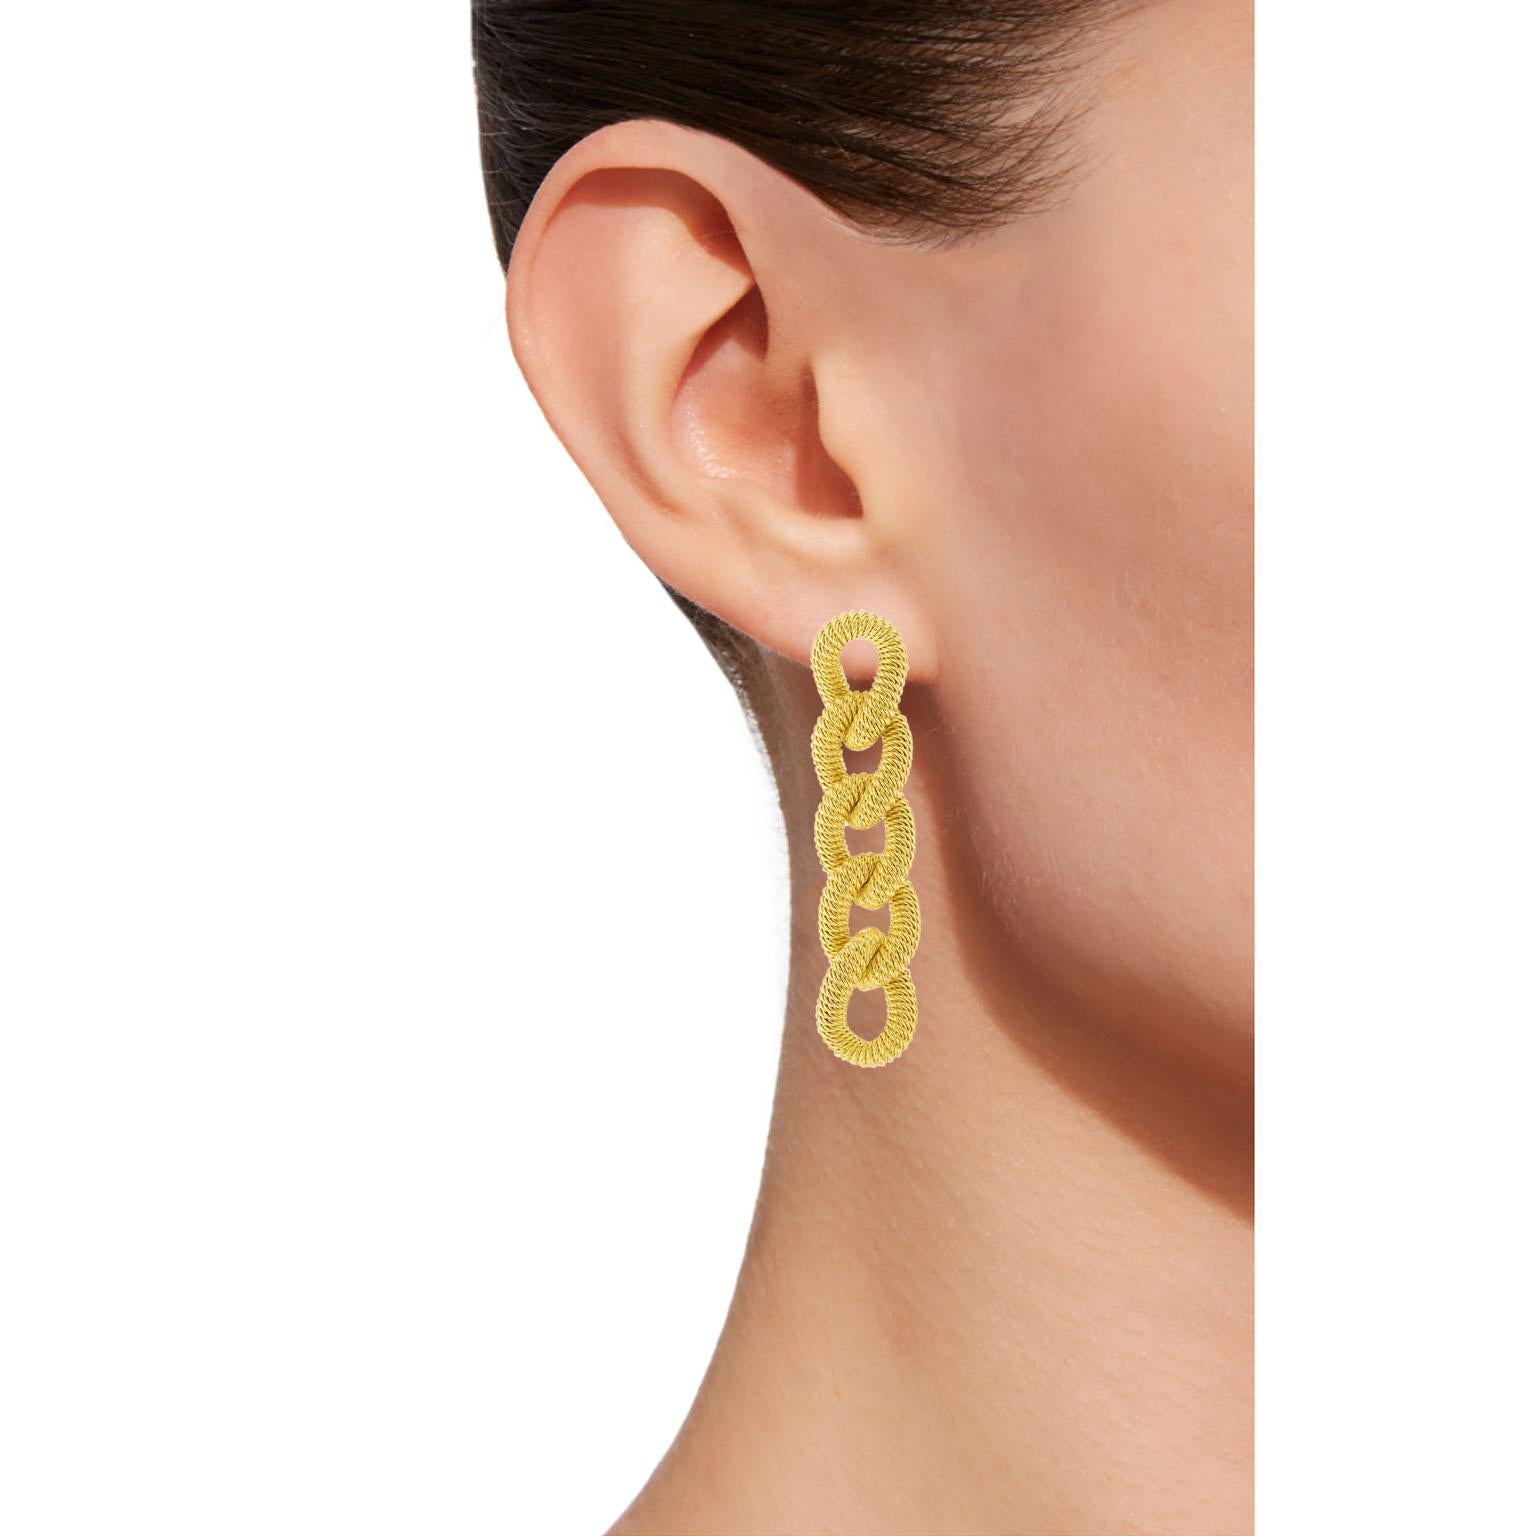 Jona design collection, hand crafted in Italy, gold-plated sterling silver twisted wire curb link ear pendants. 
Dimensions: H 1.9 in / 4.39 cm X W 0.40 in / 10 mm X D 0.22 in / 5.65 mm
Weight: 8.7 g
All Jona jewelry is new and has never been